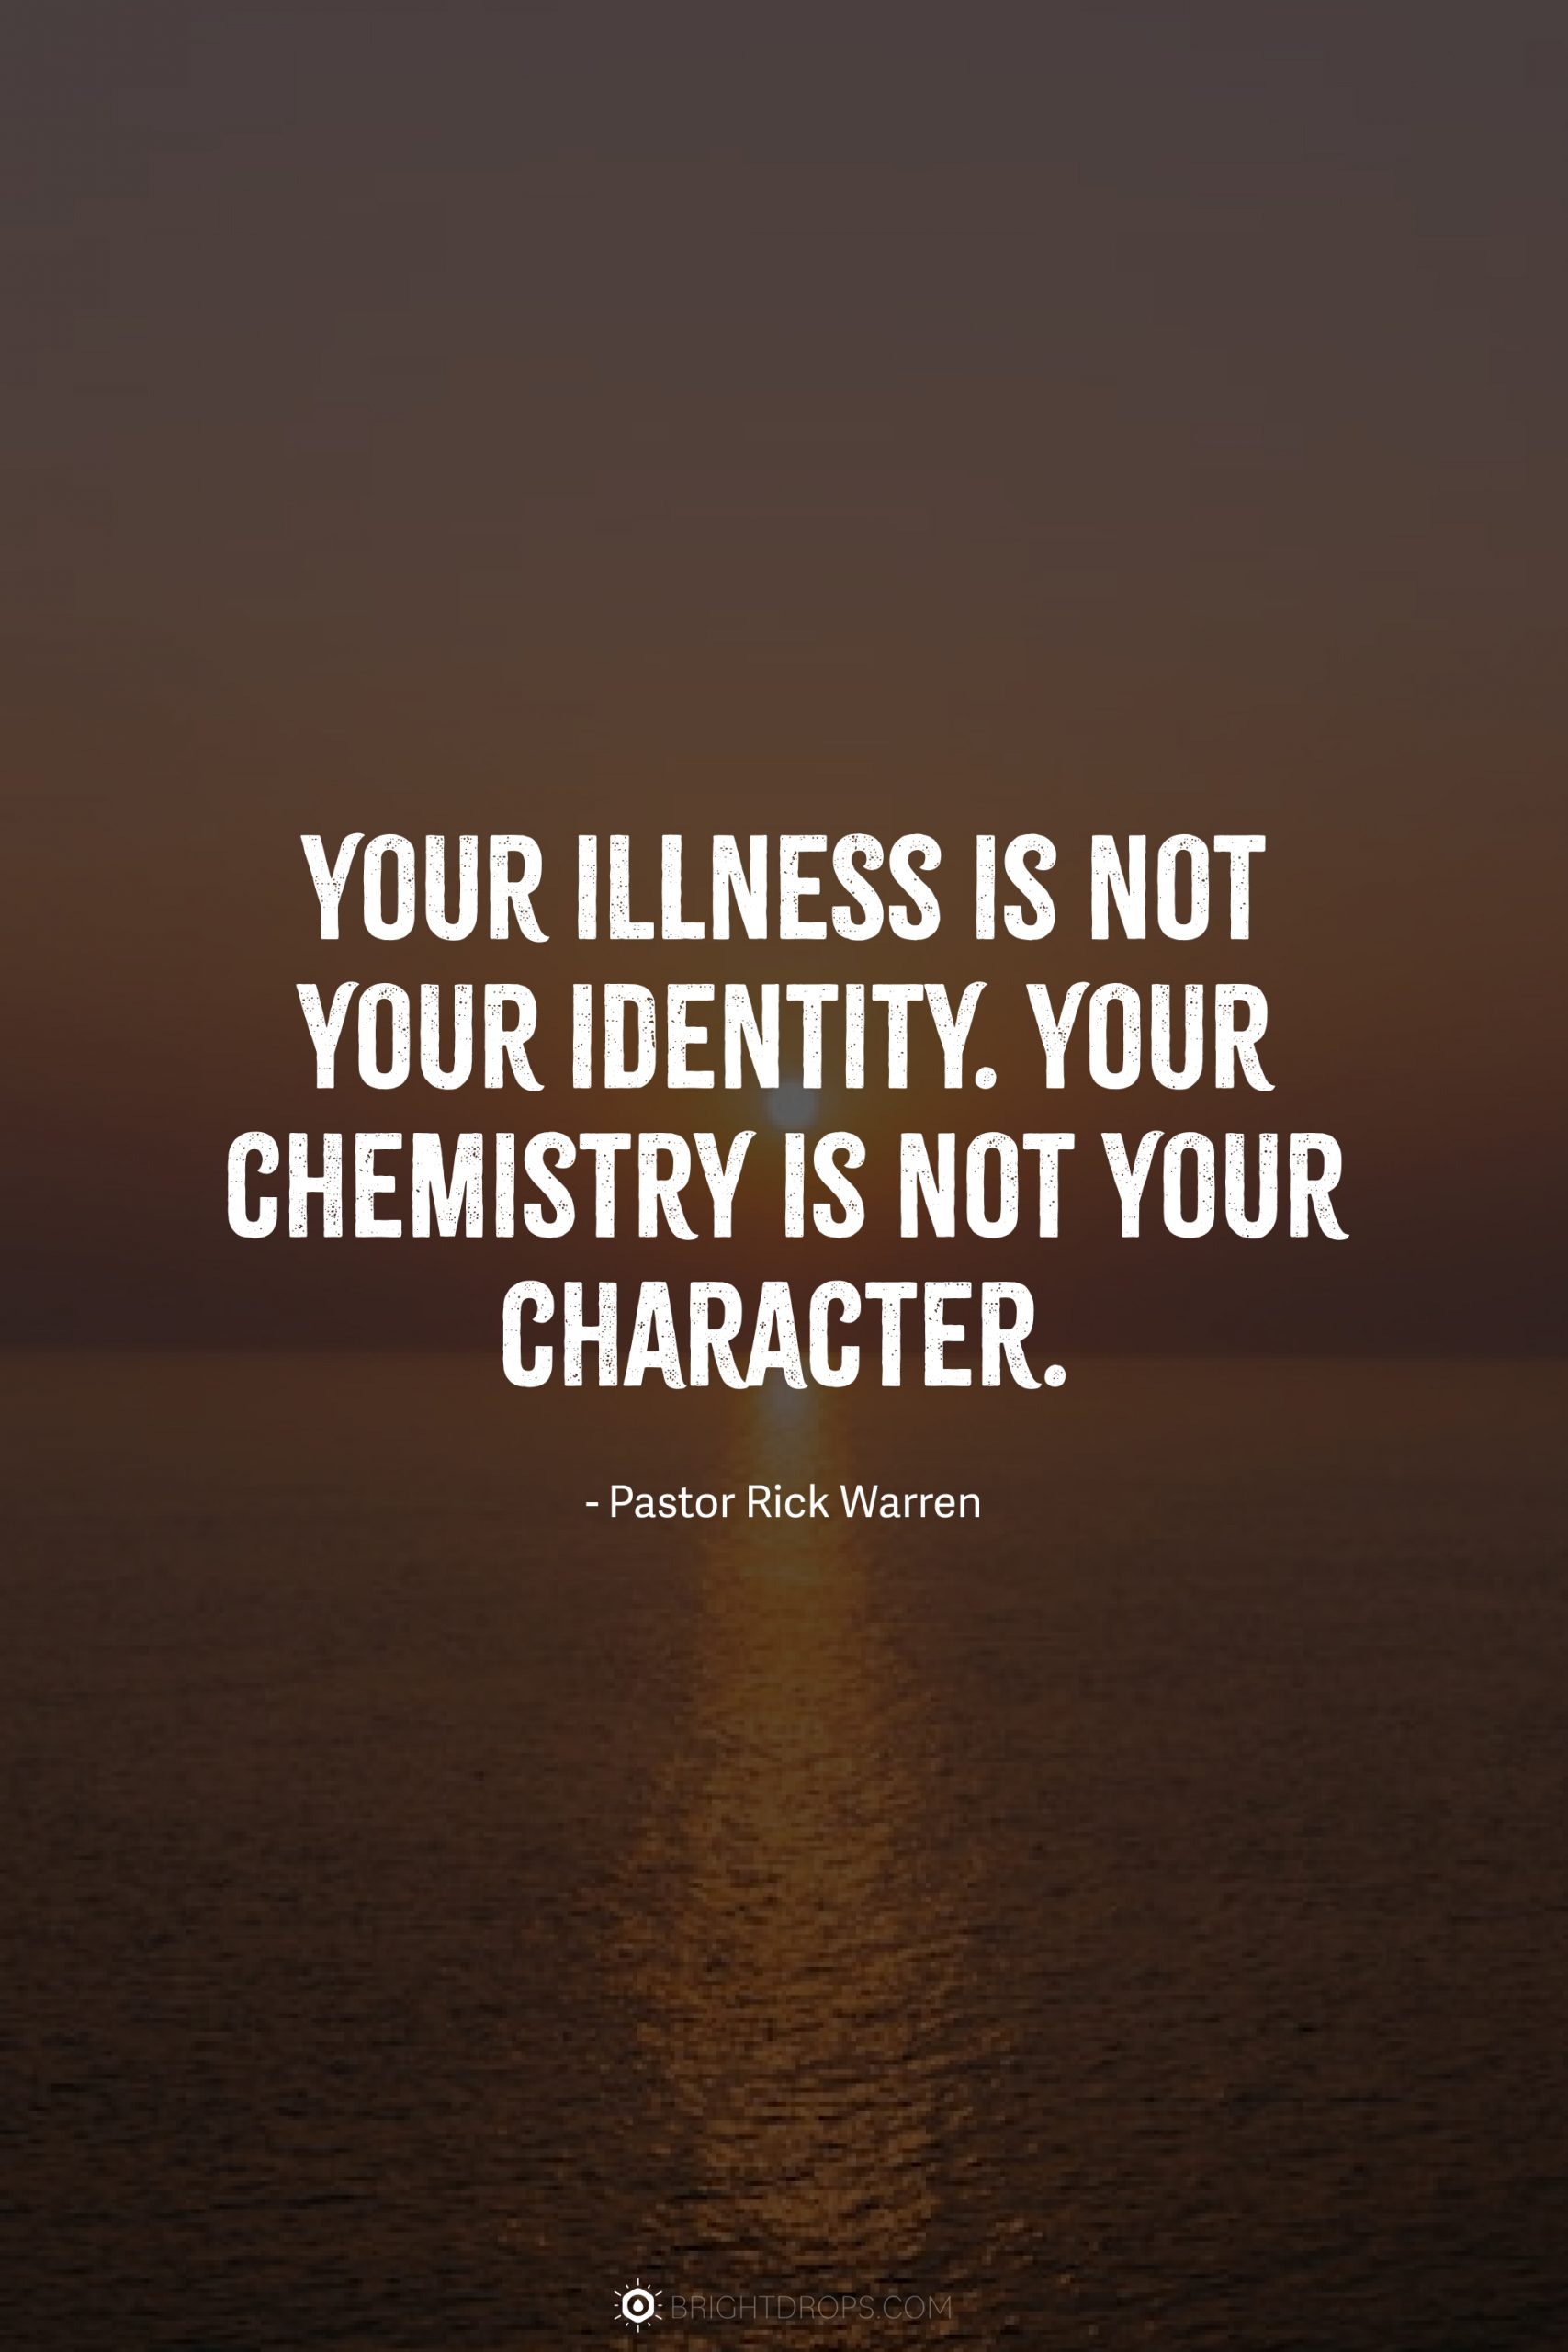 Your illness is not your identity. Your chemistry is not your character.